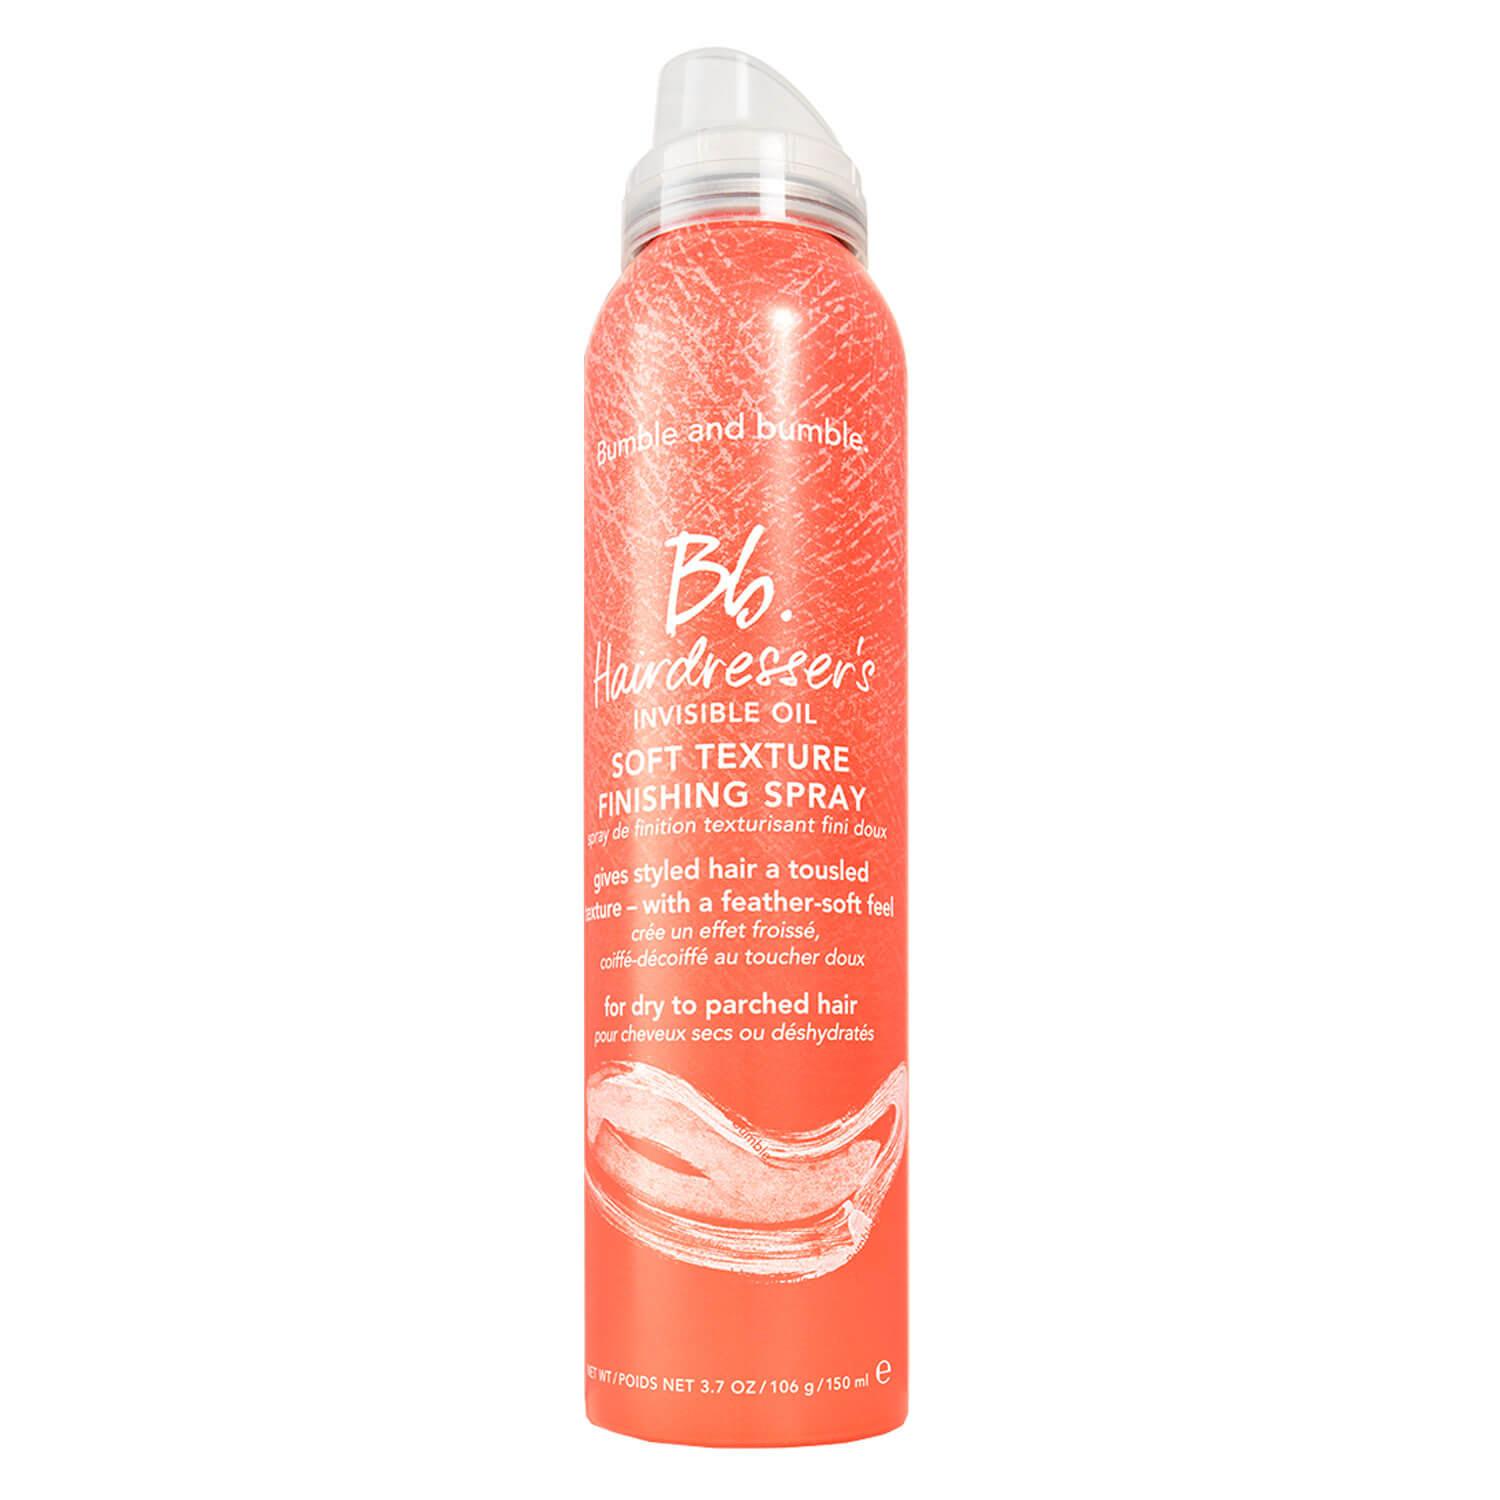 Bb. Hairdresser's Invisible Oil - Hairdresser's Invisible Oil Soft Texture Spray